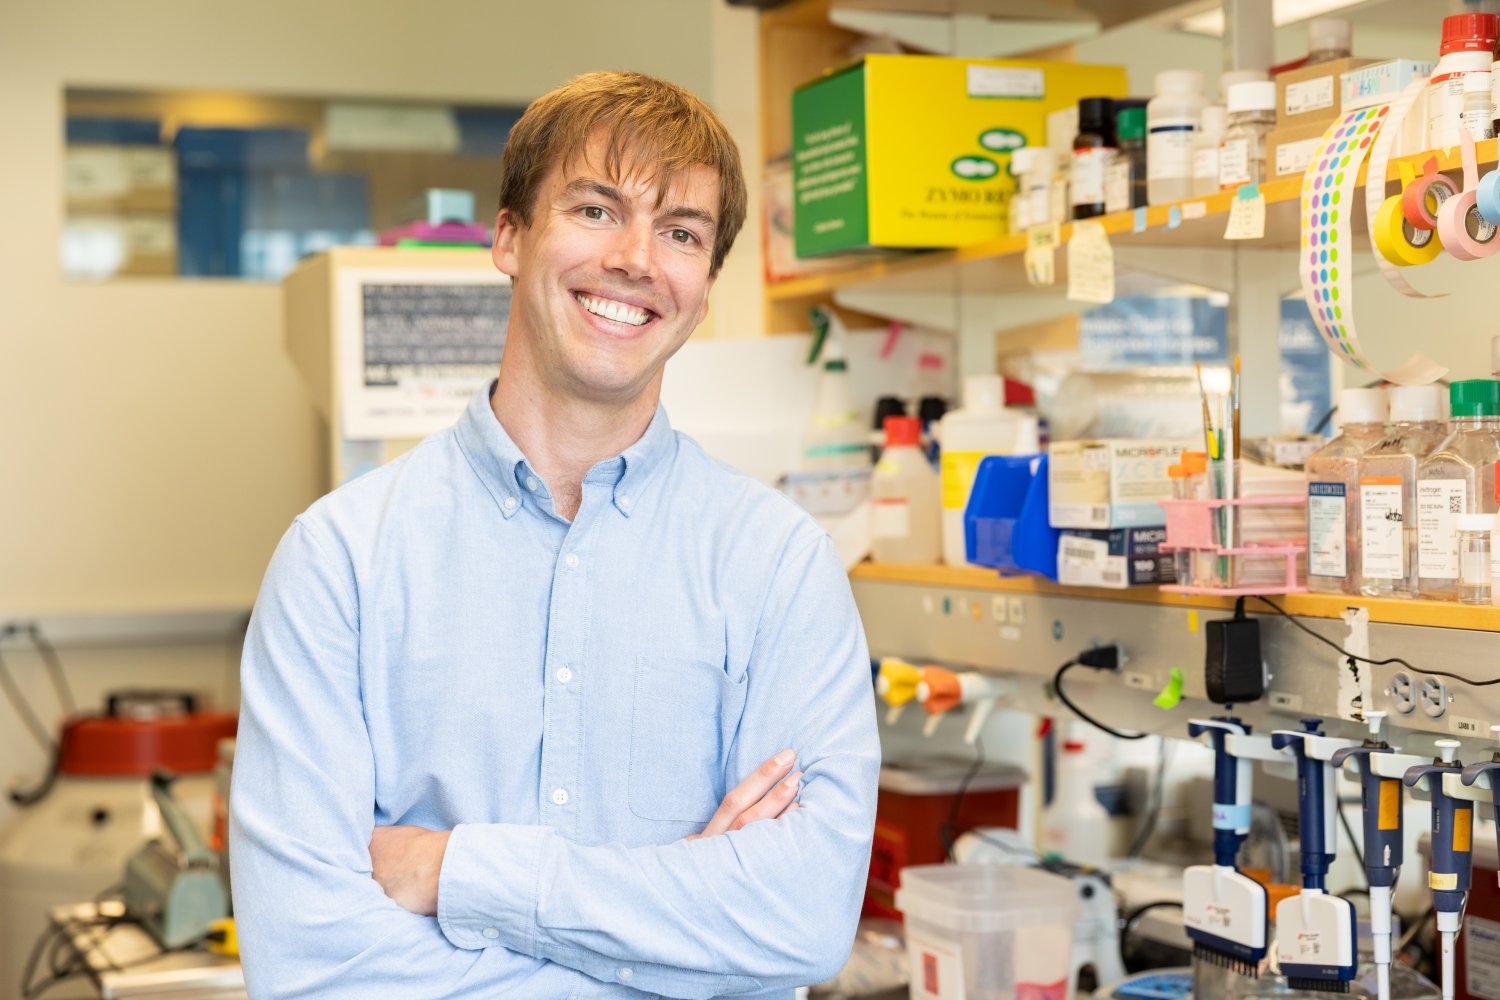 Doctoral student Mitch Murdock uses new technology and fundamental biological techniques to study the impacts of Alzheimer’s disease on the brain.